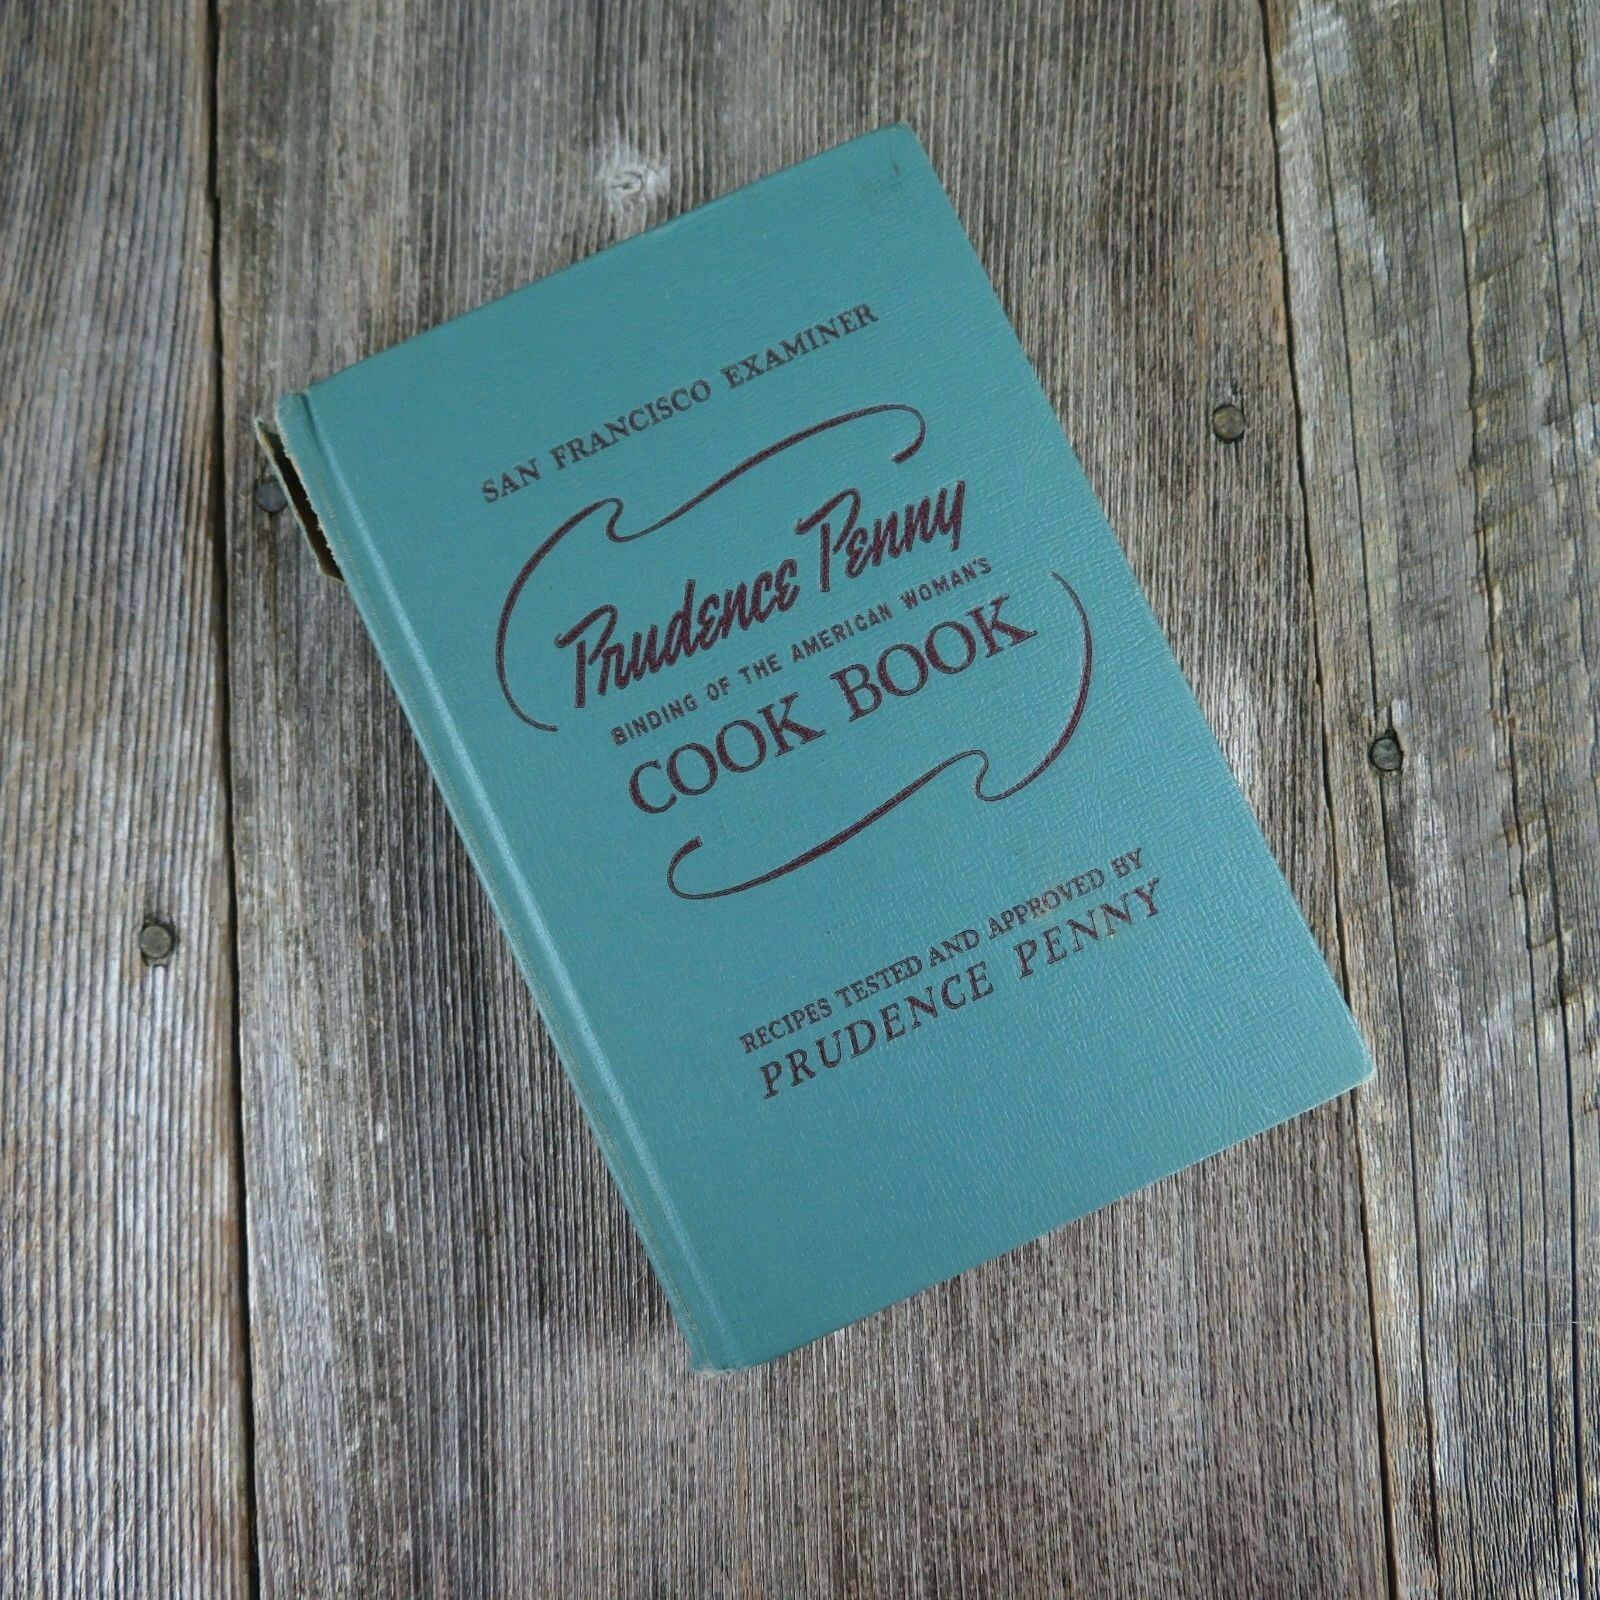 Vintage Cookbook Prudence Penny Binding of the American Woman 1953 Examiner - At Grandma's Table